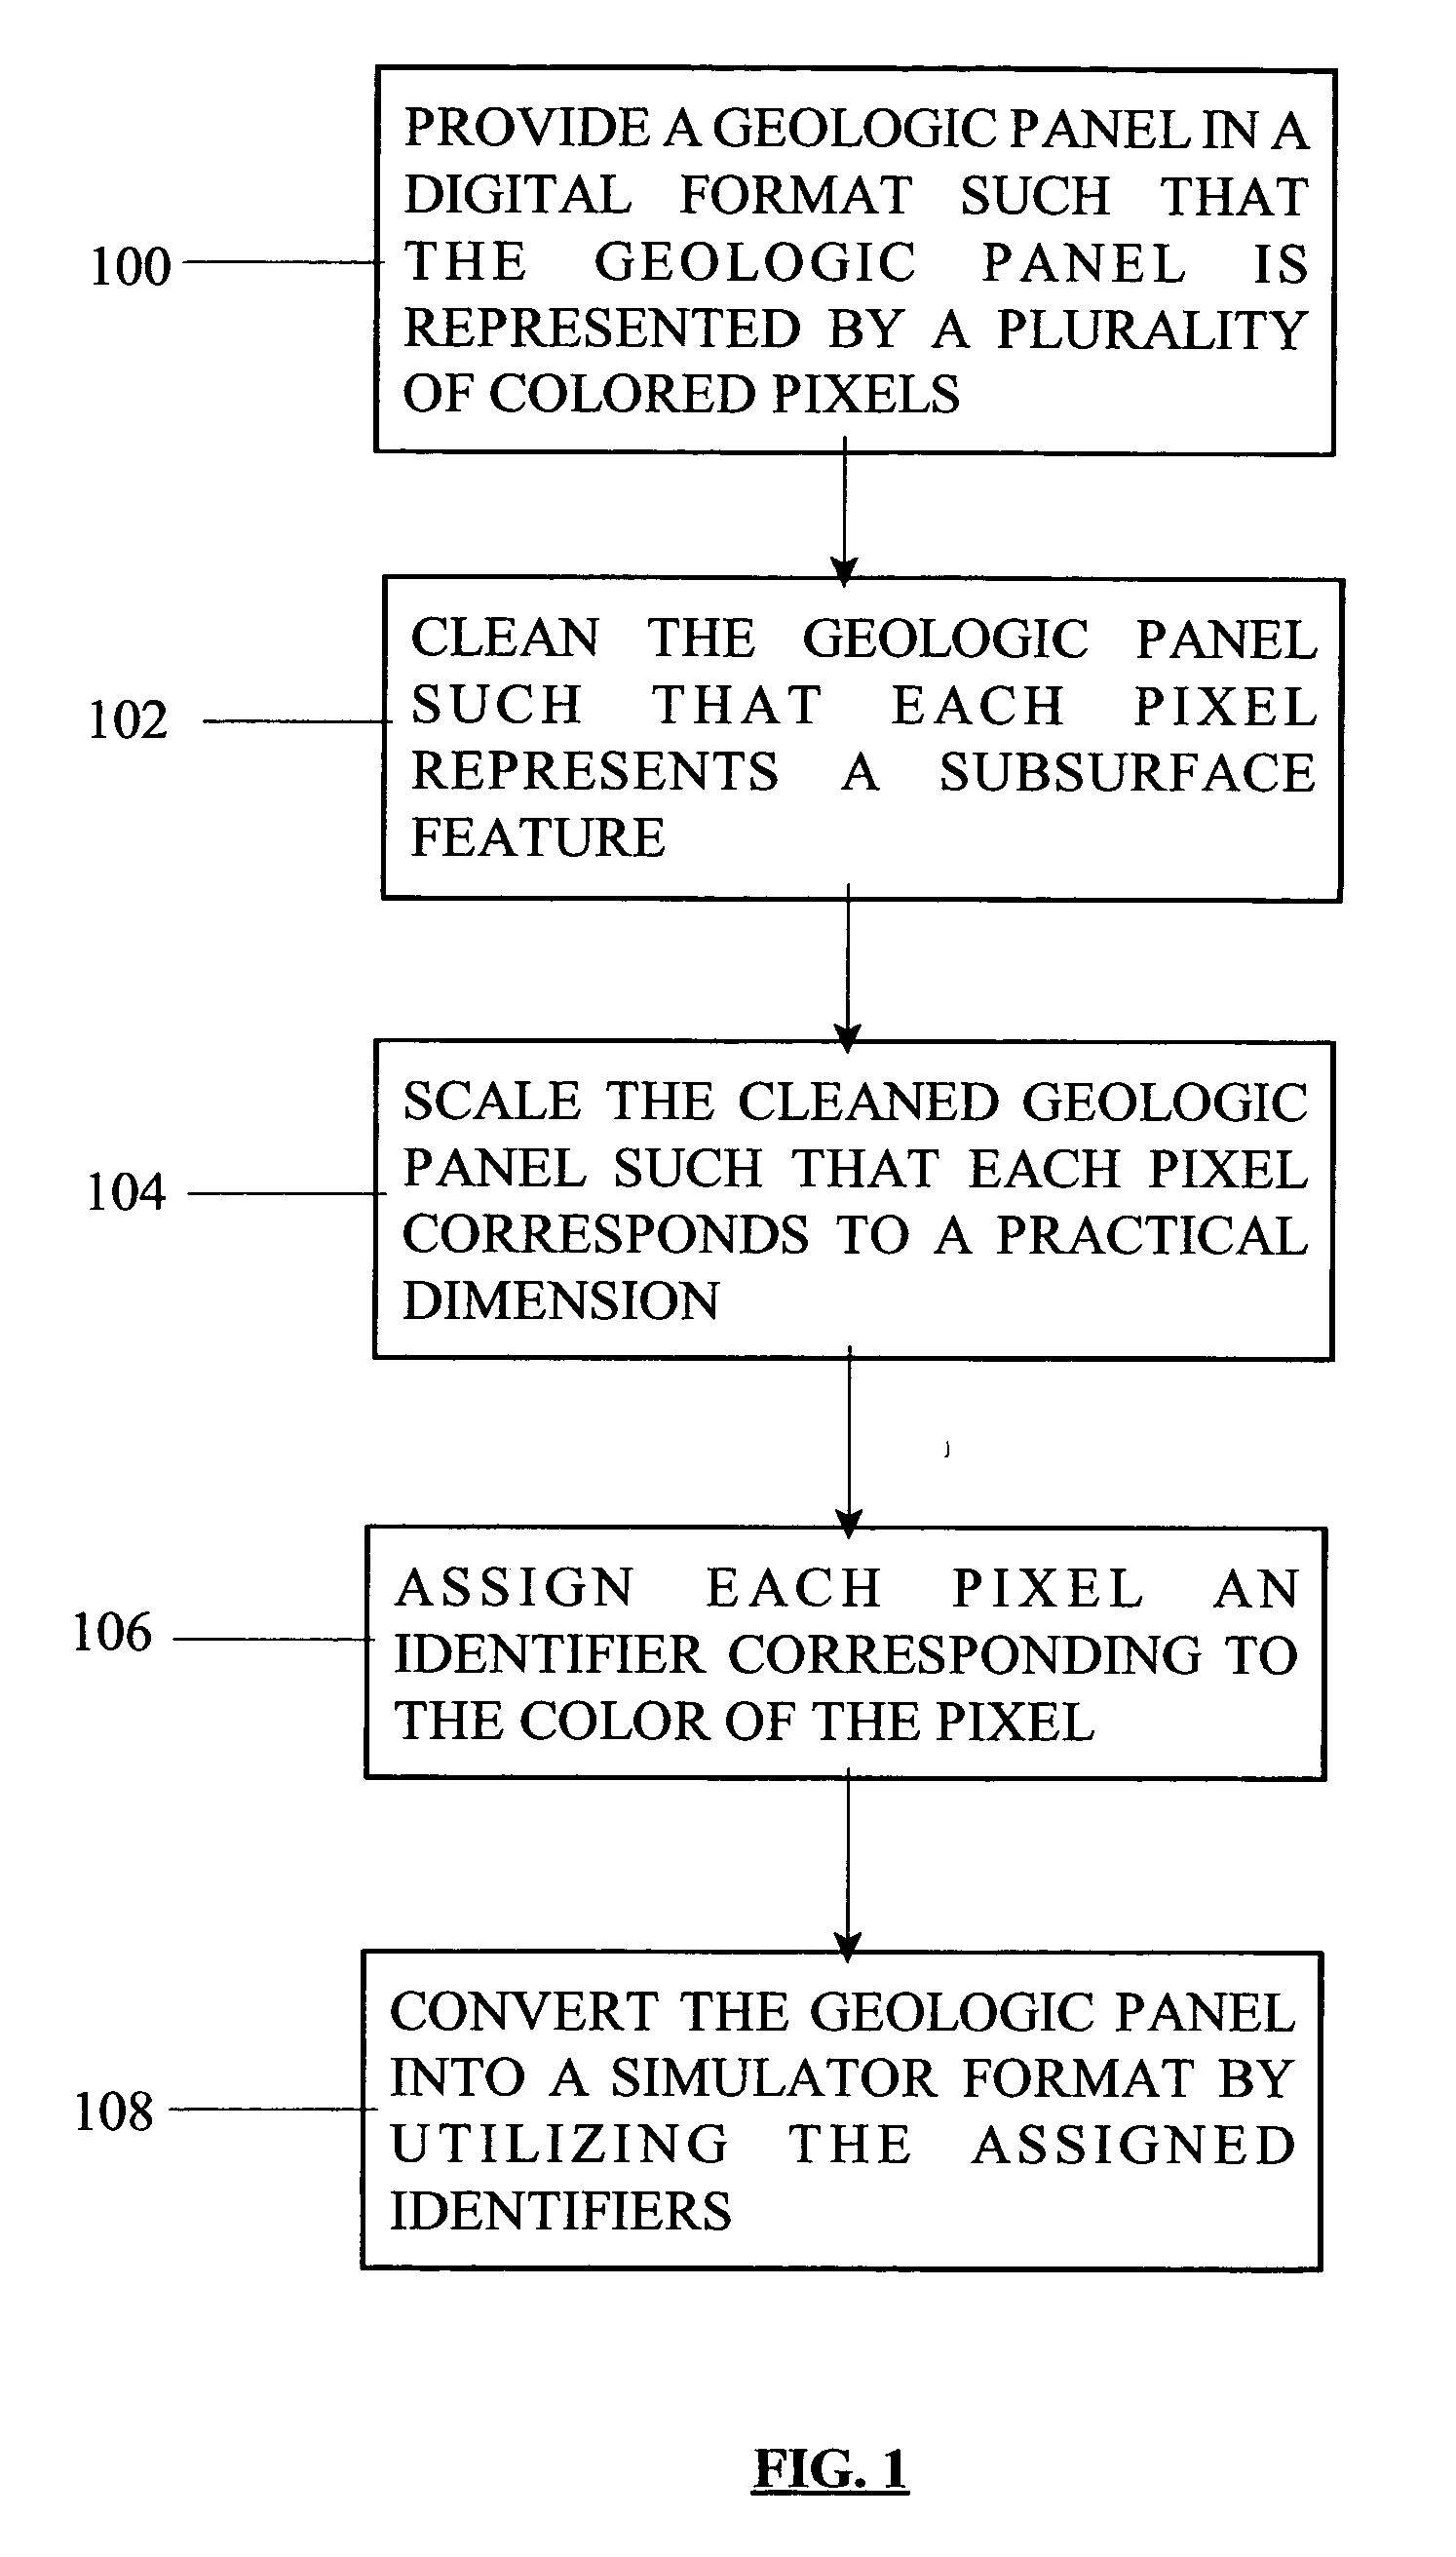 Method for converting a geologic panel into a simulator format